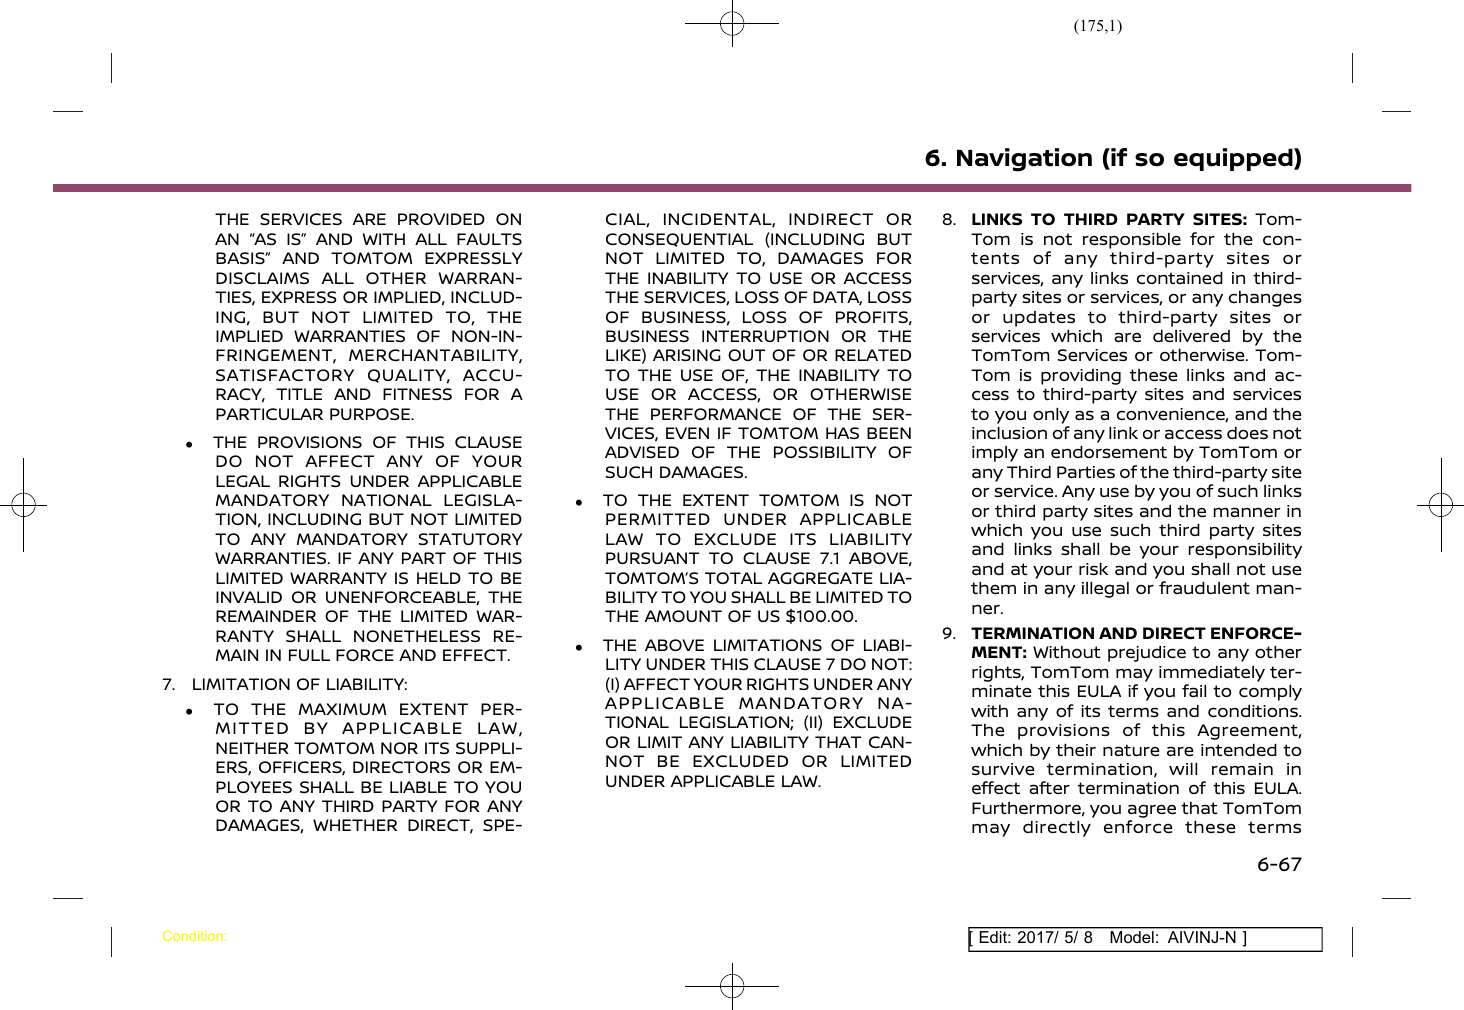 Page 175 of Robert Bosch Car Multimedia AIVICMFB0 Navigation System with Bluetooth and WLAN User Manual